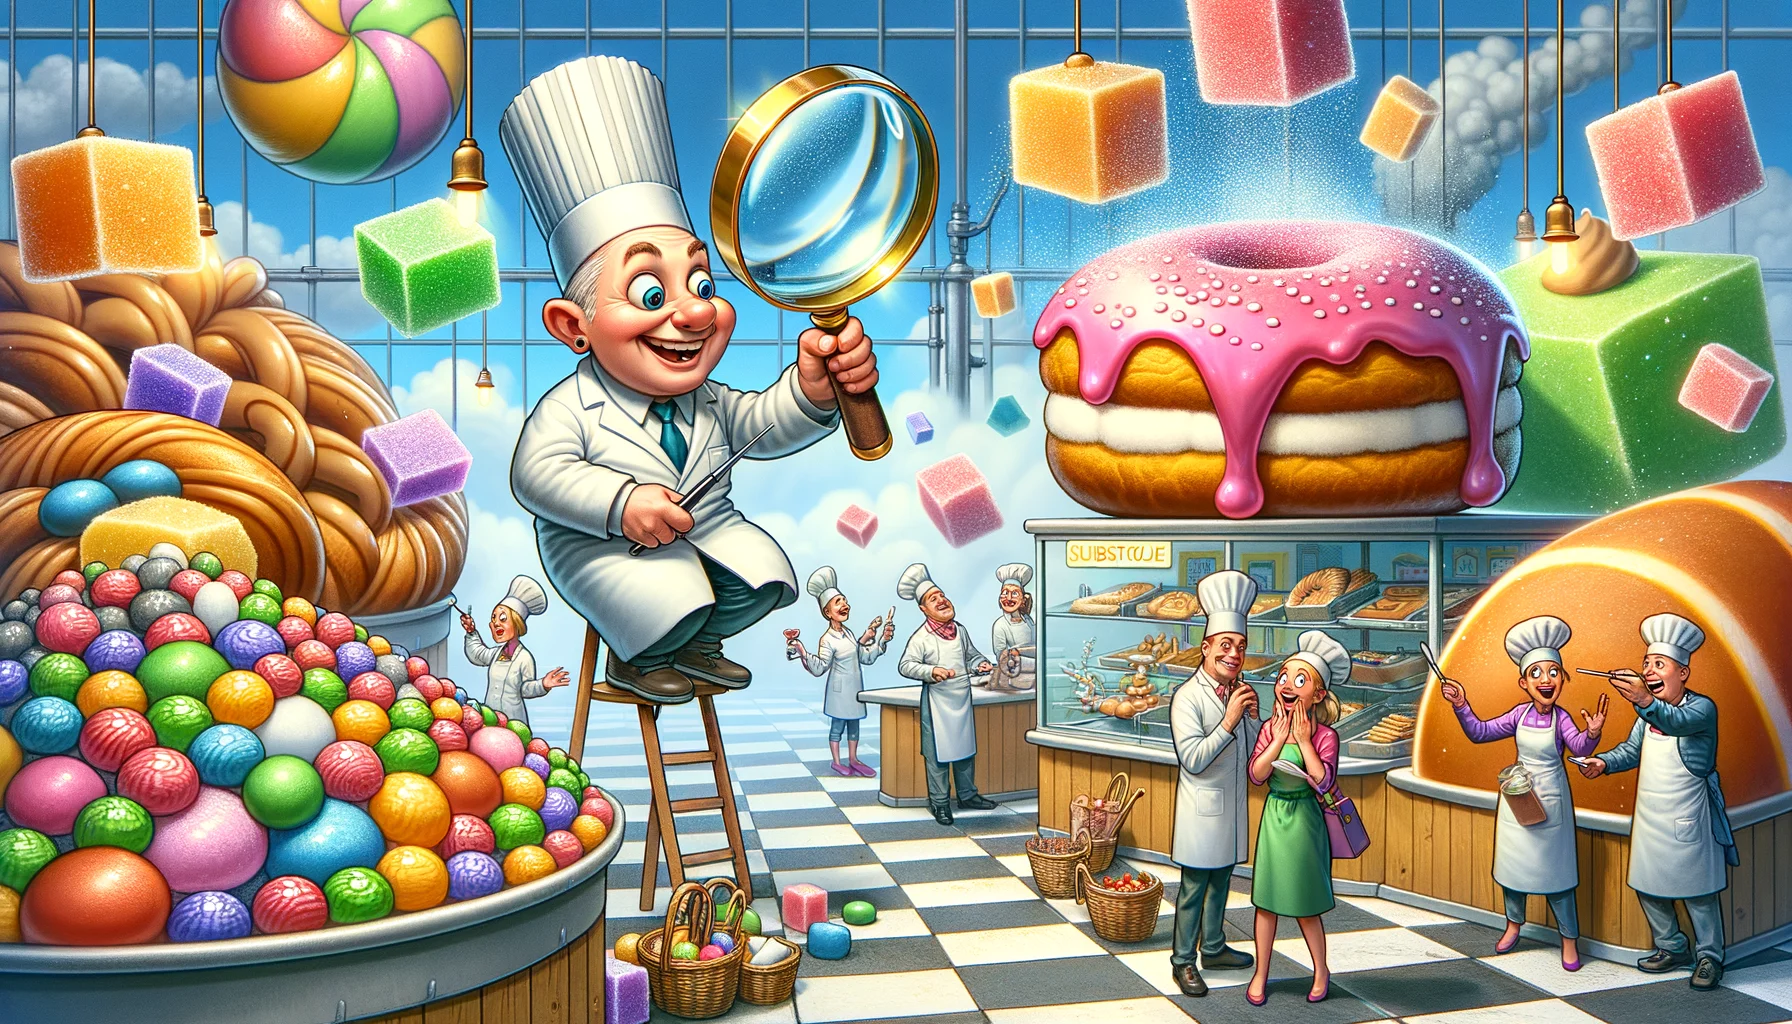 Create a comical, realistic image representing the concept of 'Sugar Reduction Solutions in Sweets'. Picture a candy shop with a variety of colorful sweets, but with a twist. In one corner, a tiny, whimsical scientist with a large magnifying glass is carefully reducing the size of a colossal sugar cube that's as big as himself. In another, a pastry chef is drizzling a shining, almost pixie-dust-like substitute onto a giant doughnut. Shoppers with surprised and fascinated expressions are trying out these unusually 'healthy' sweets, chuckling at the unconventional yet effective ways of reducing sugar.